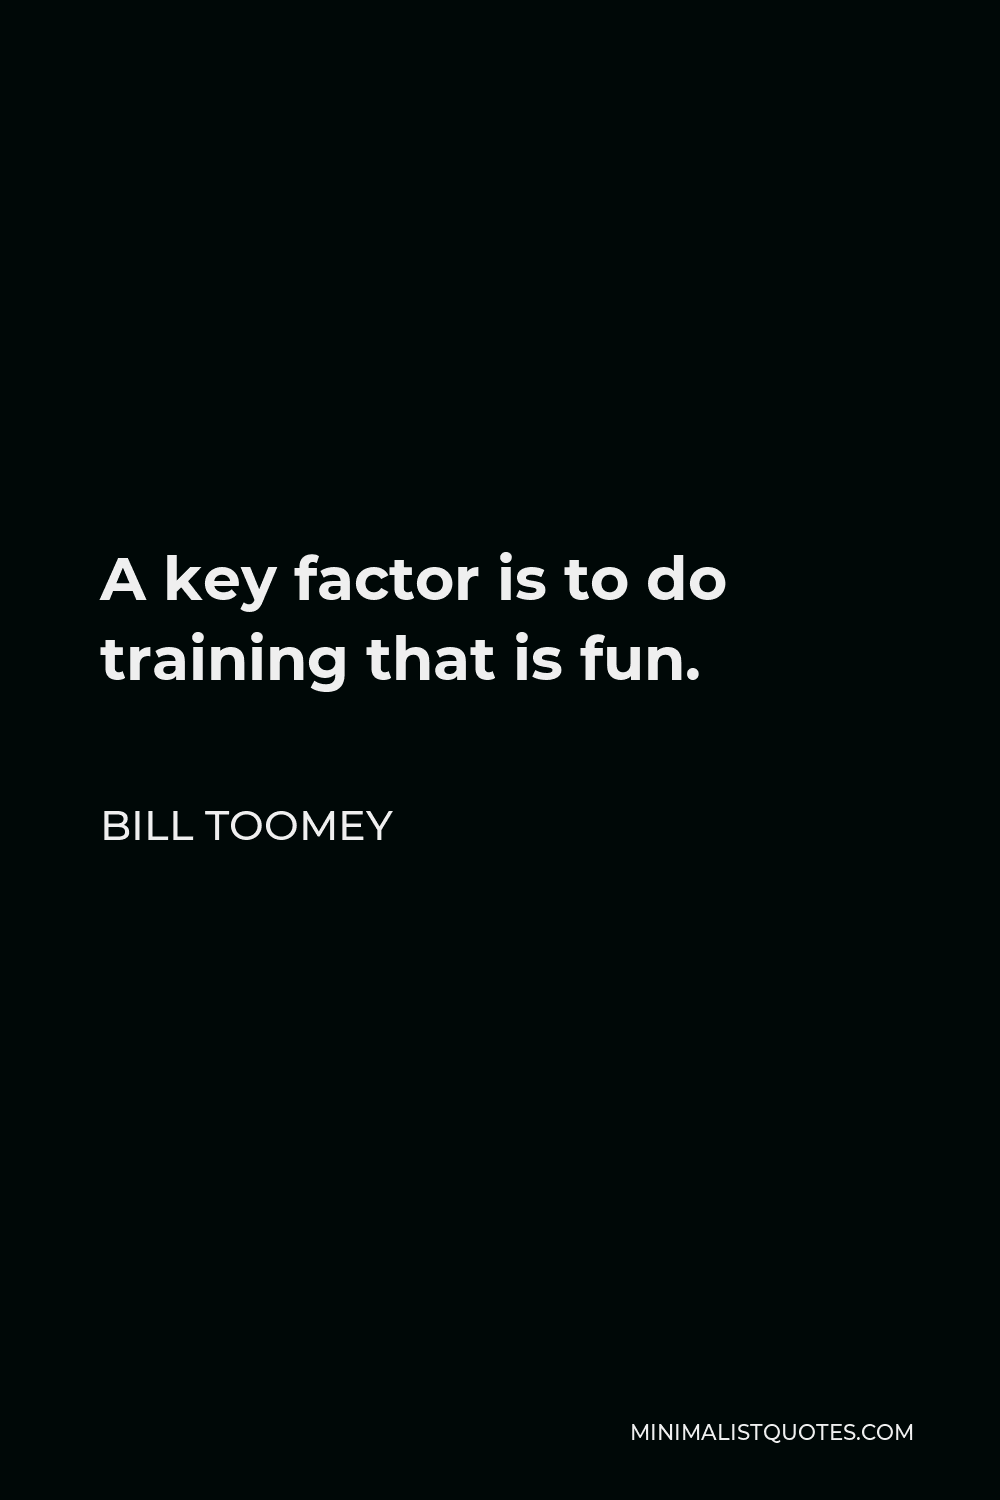 Bill Toomey Quote - A key factor is to do training that is fun.